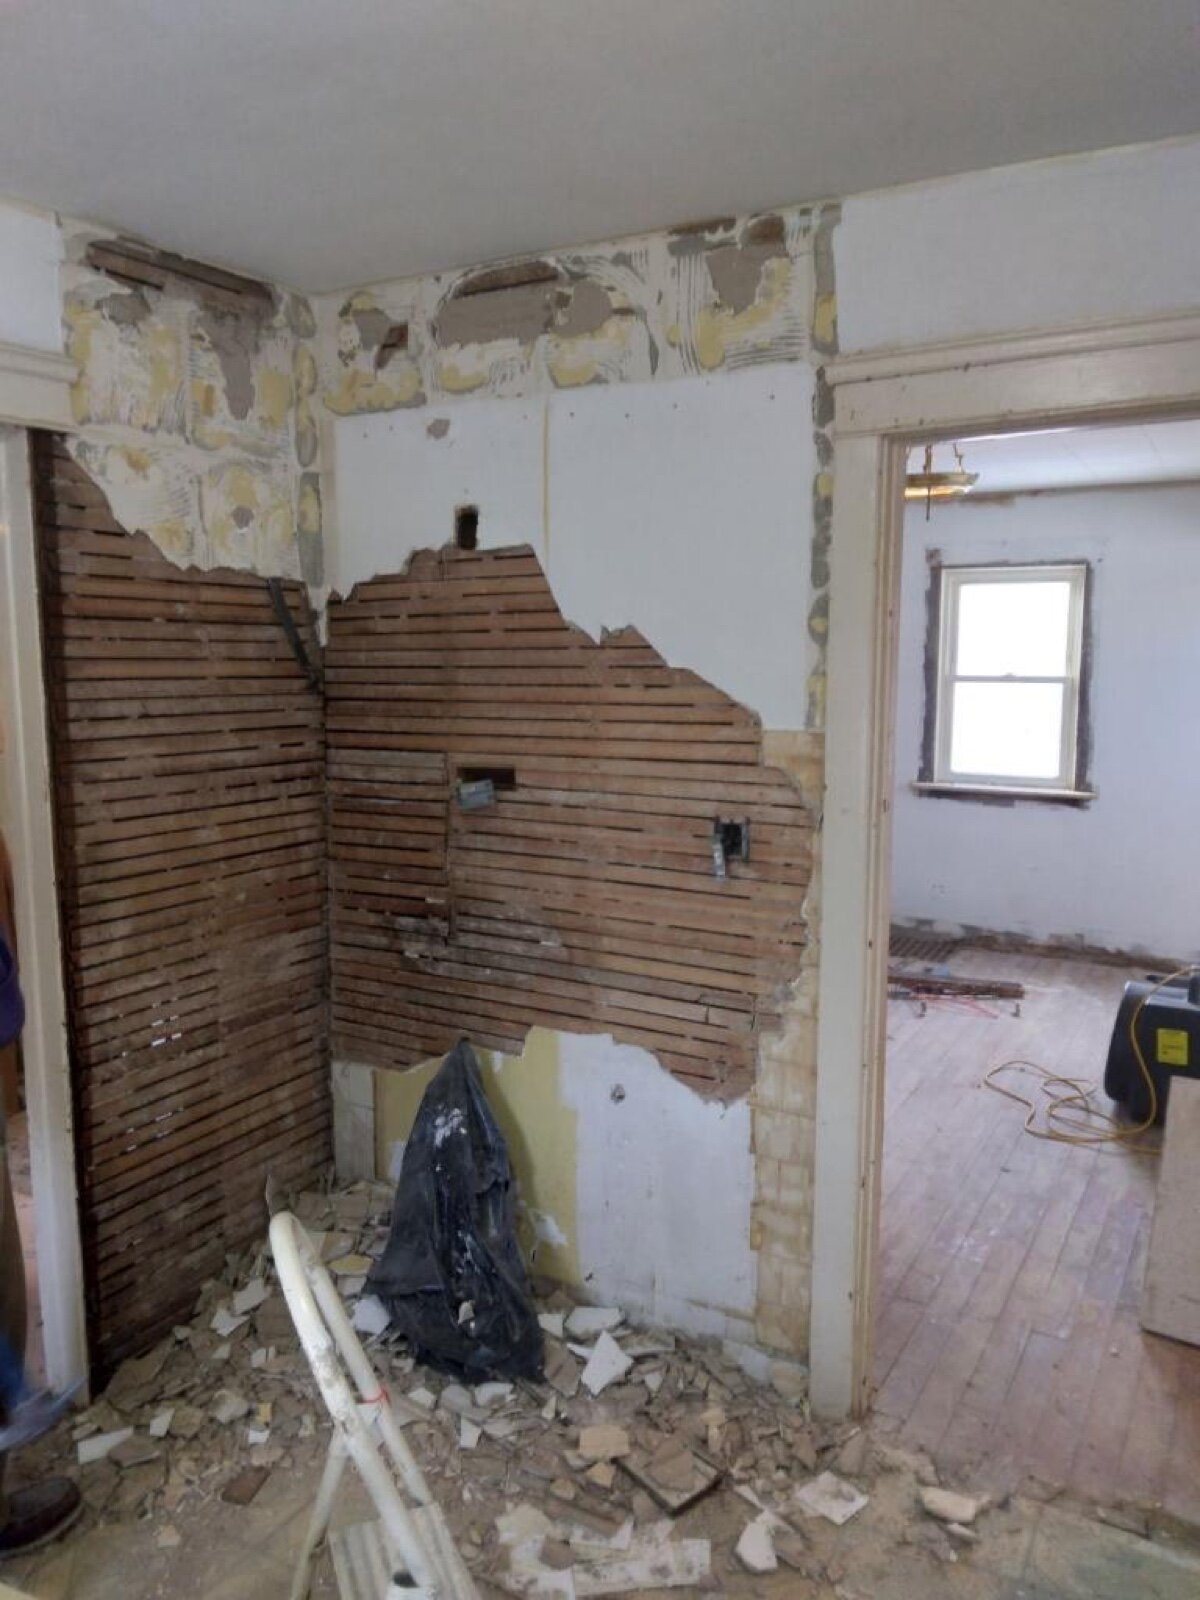 Photo inside the house at 238 Greenwood Avenue before the church began renovating it